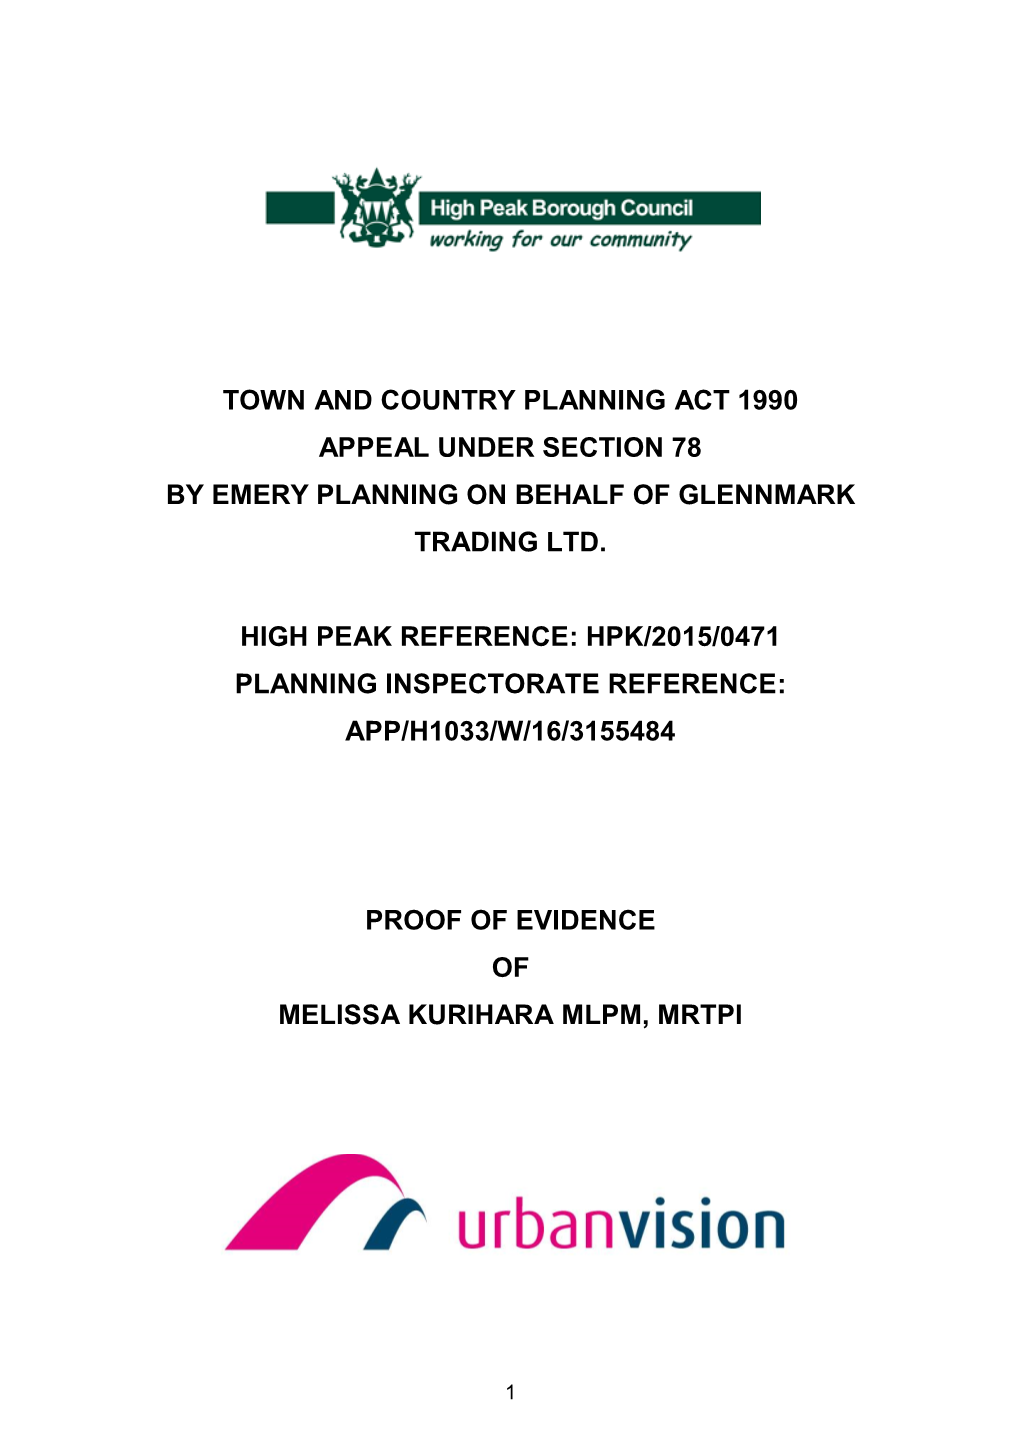 Town and Country Planning Act 1990 Appeal Under Section 78 by Emery Planning on Behalf of Glennmark Trading Ltd